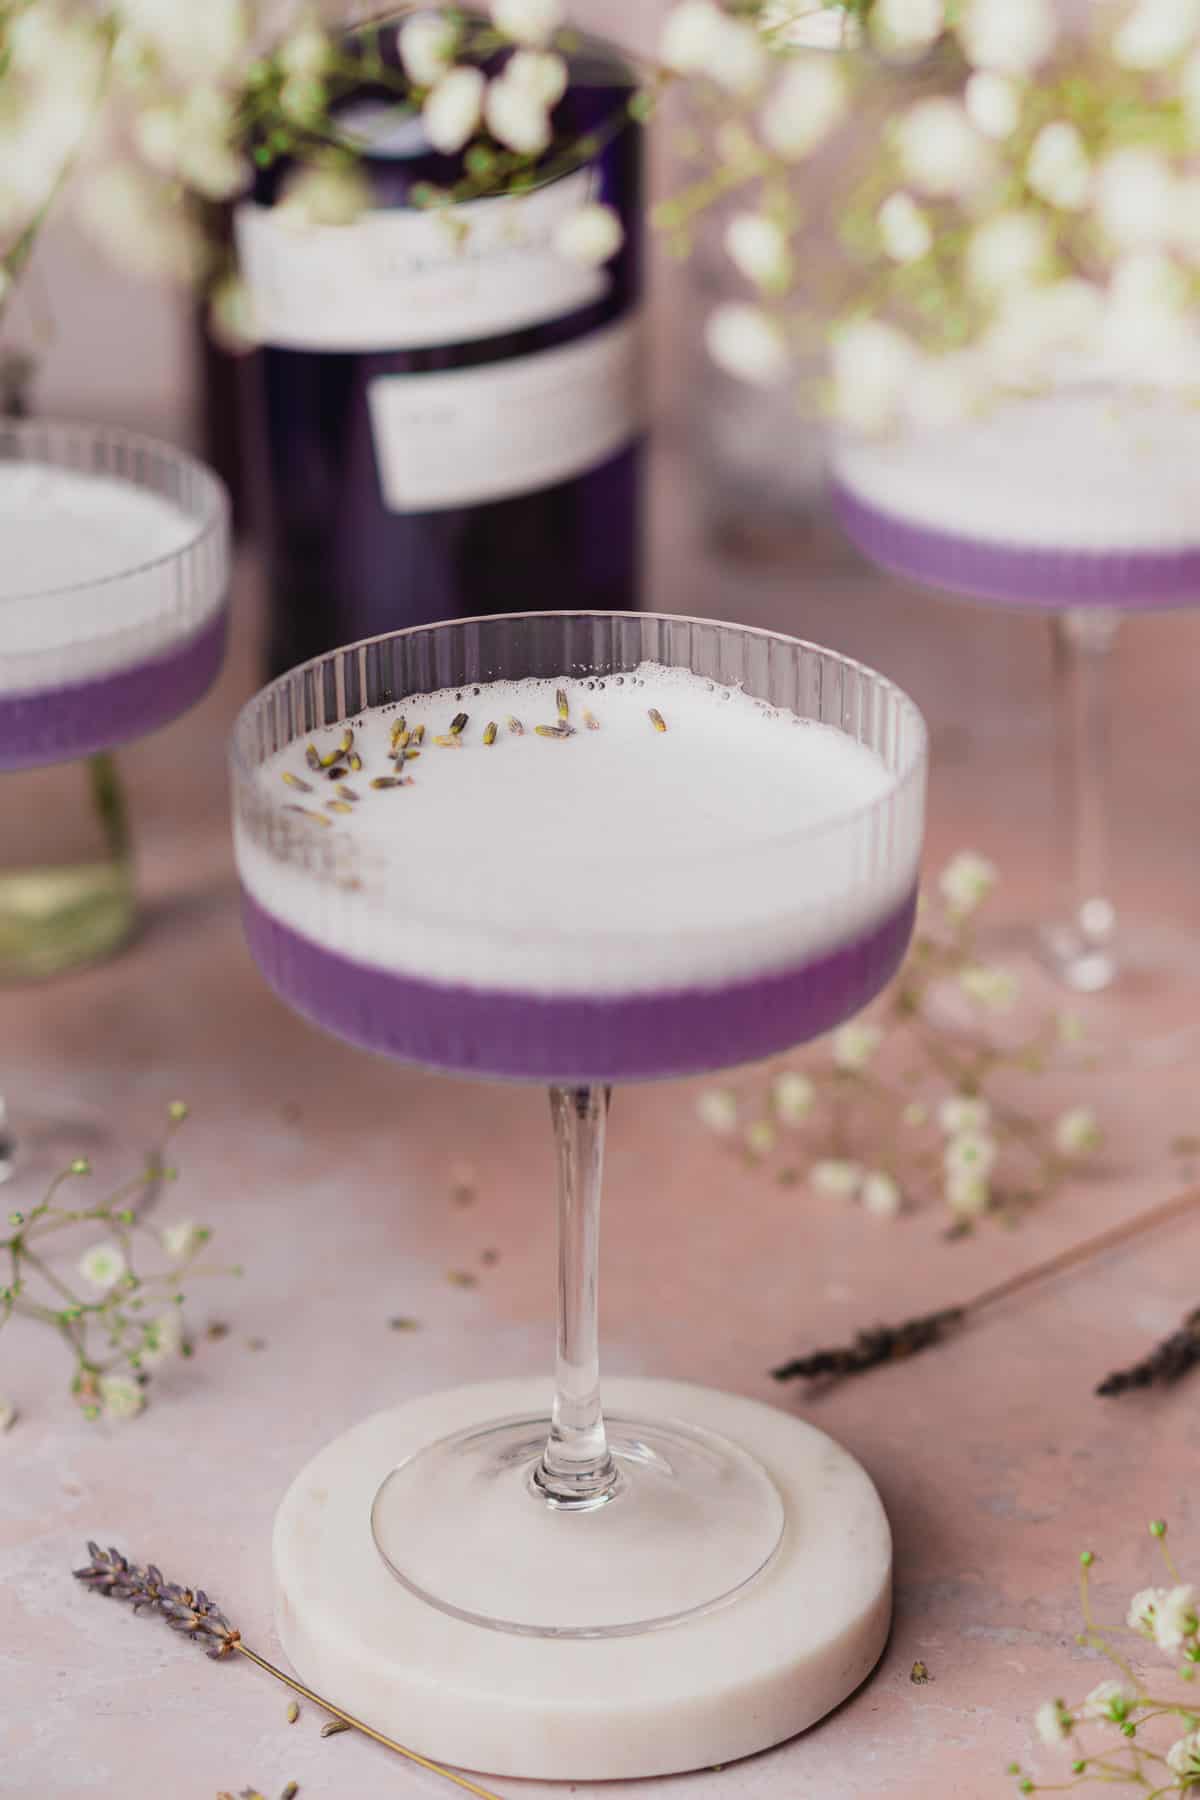 super pretty close up shot of a lavender gin cocktail with foamy egg white topping.